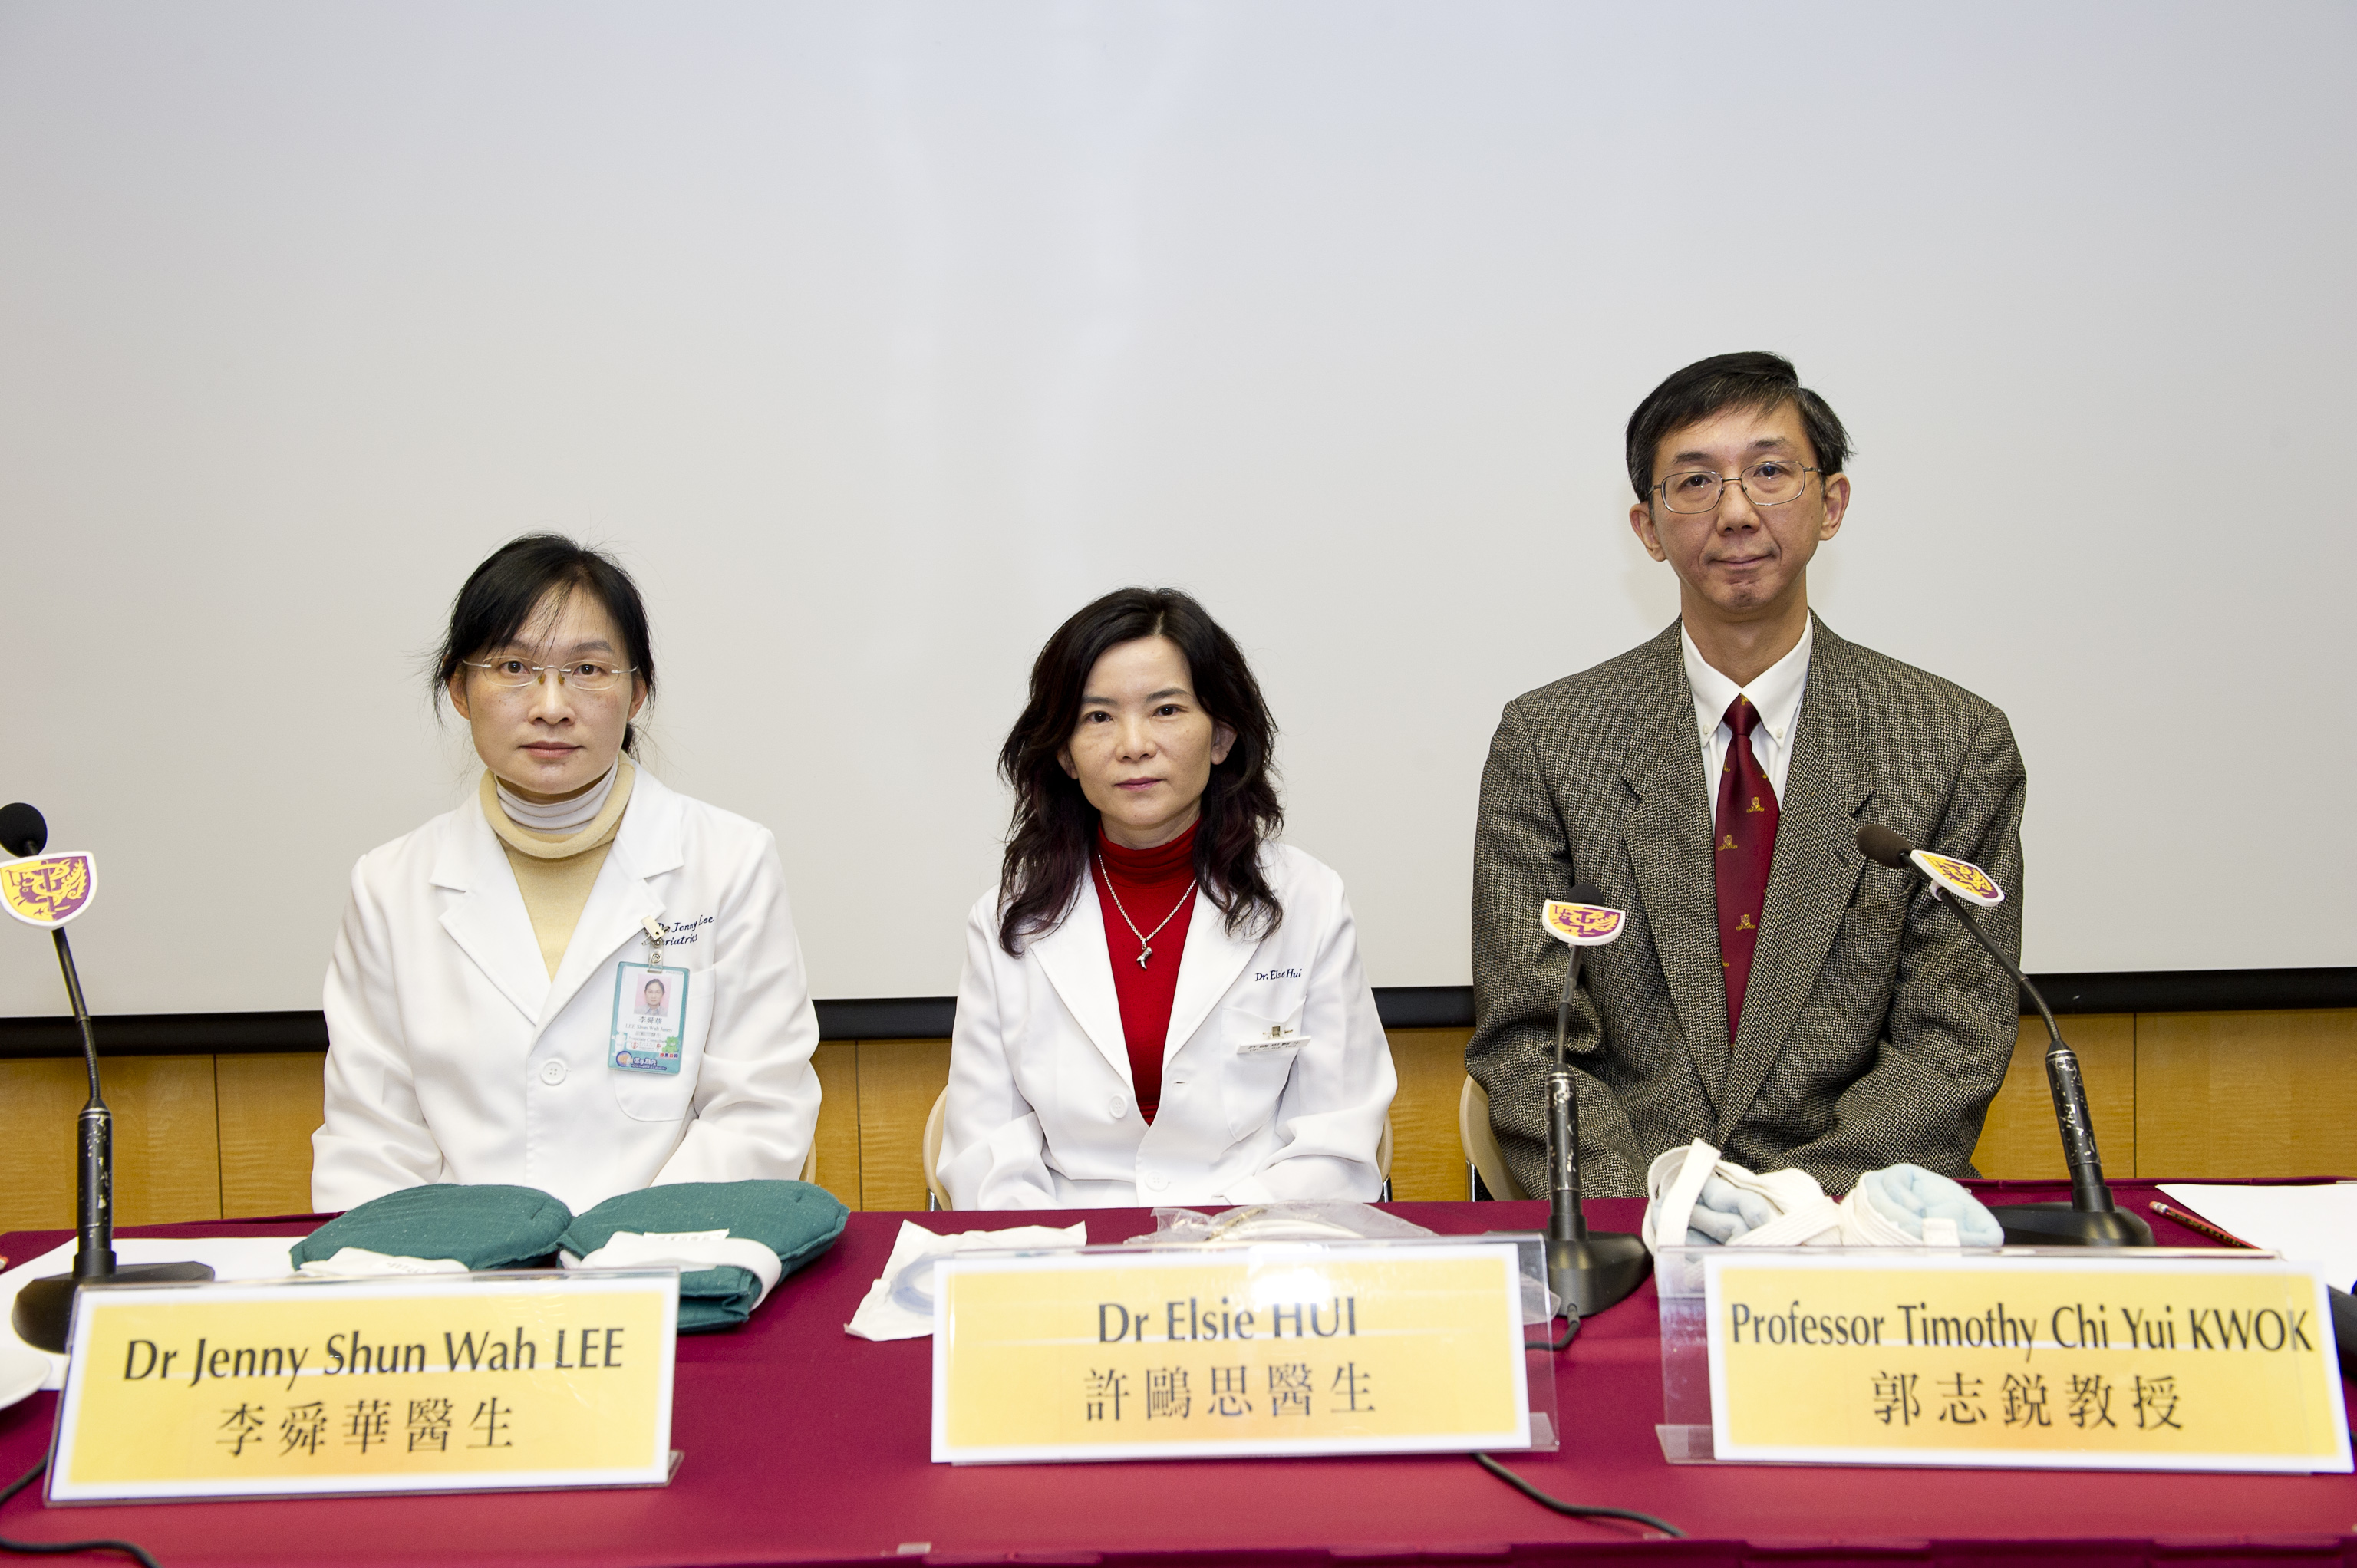 (From Left) Dr Jenny Shun Wah LEE, Associate Consultant, Department of Medicine and Geriatrics, Shatin Hospital; Dr Elsie HUI, Chief of Service, Department of Medicine and Geriatrics, Shatin Hospital; and Professor Timothy Chi Yui KWOK, Professor, Division of Geriatrics, Department of Medicine and Therapeutics, CUHK